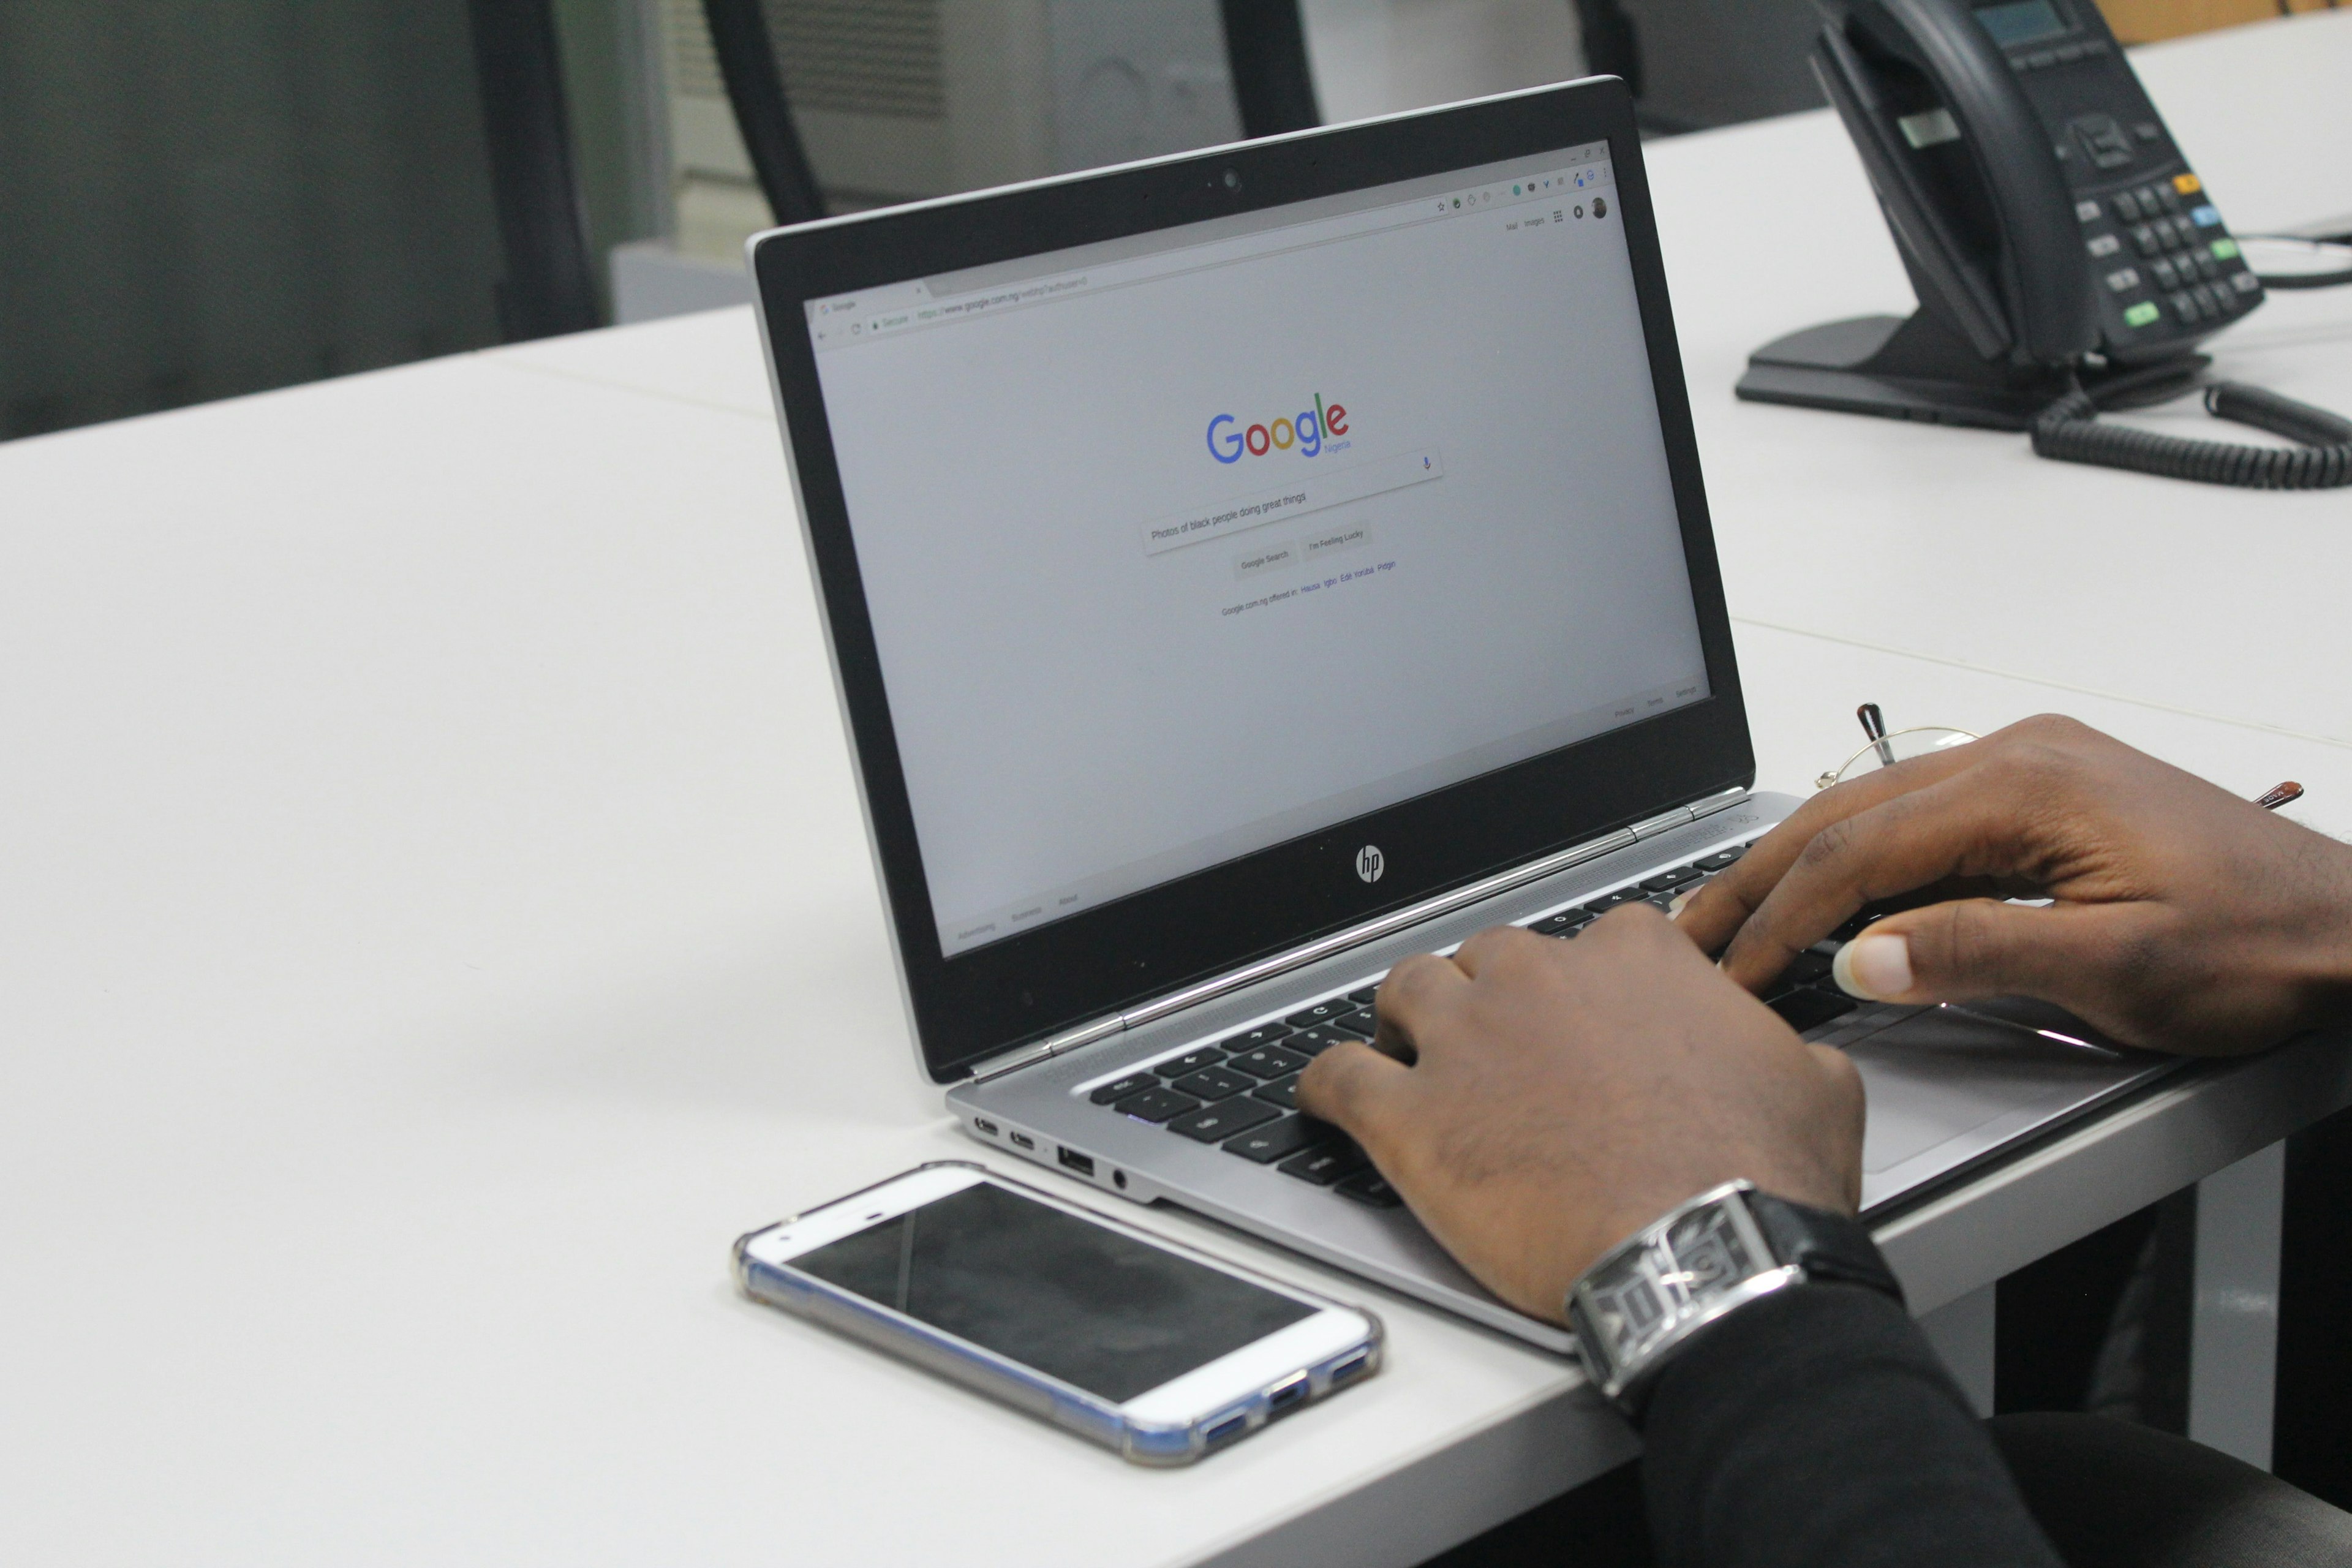 a person typing on a computer with Google on the screen